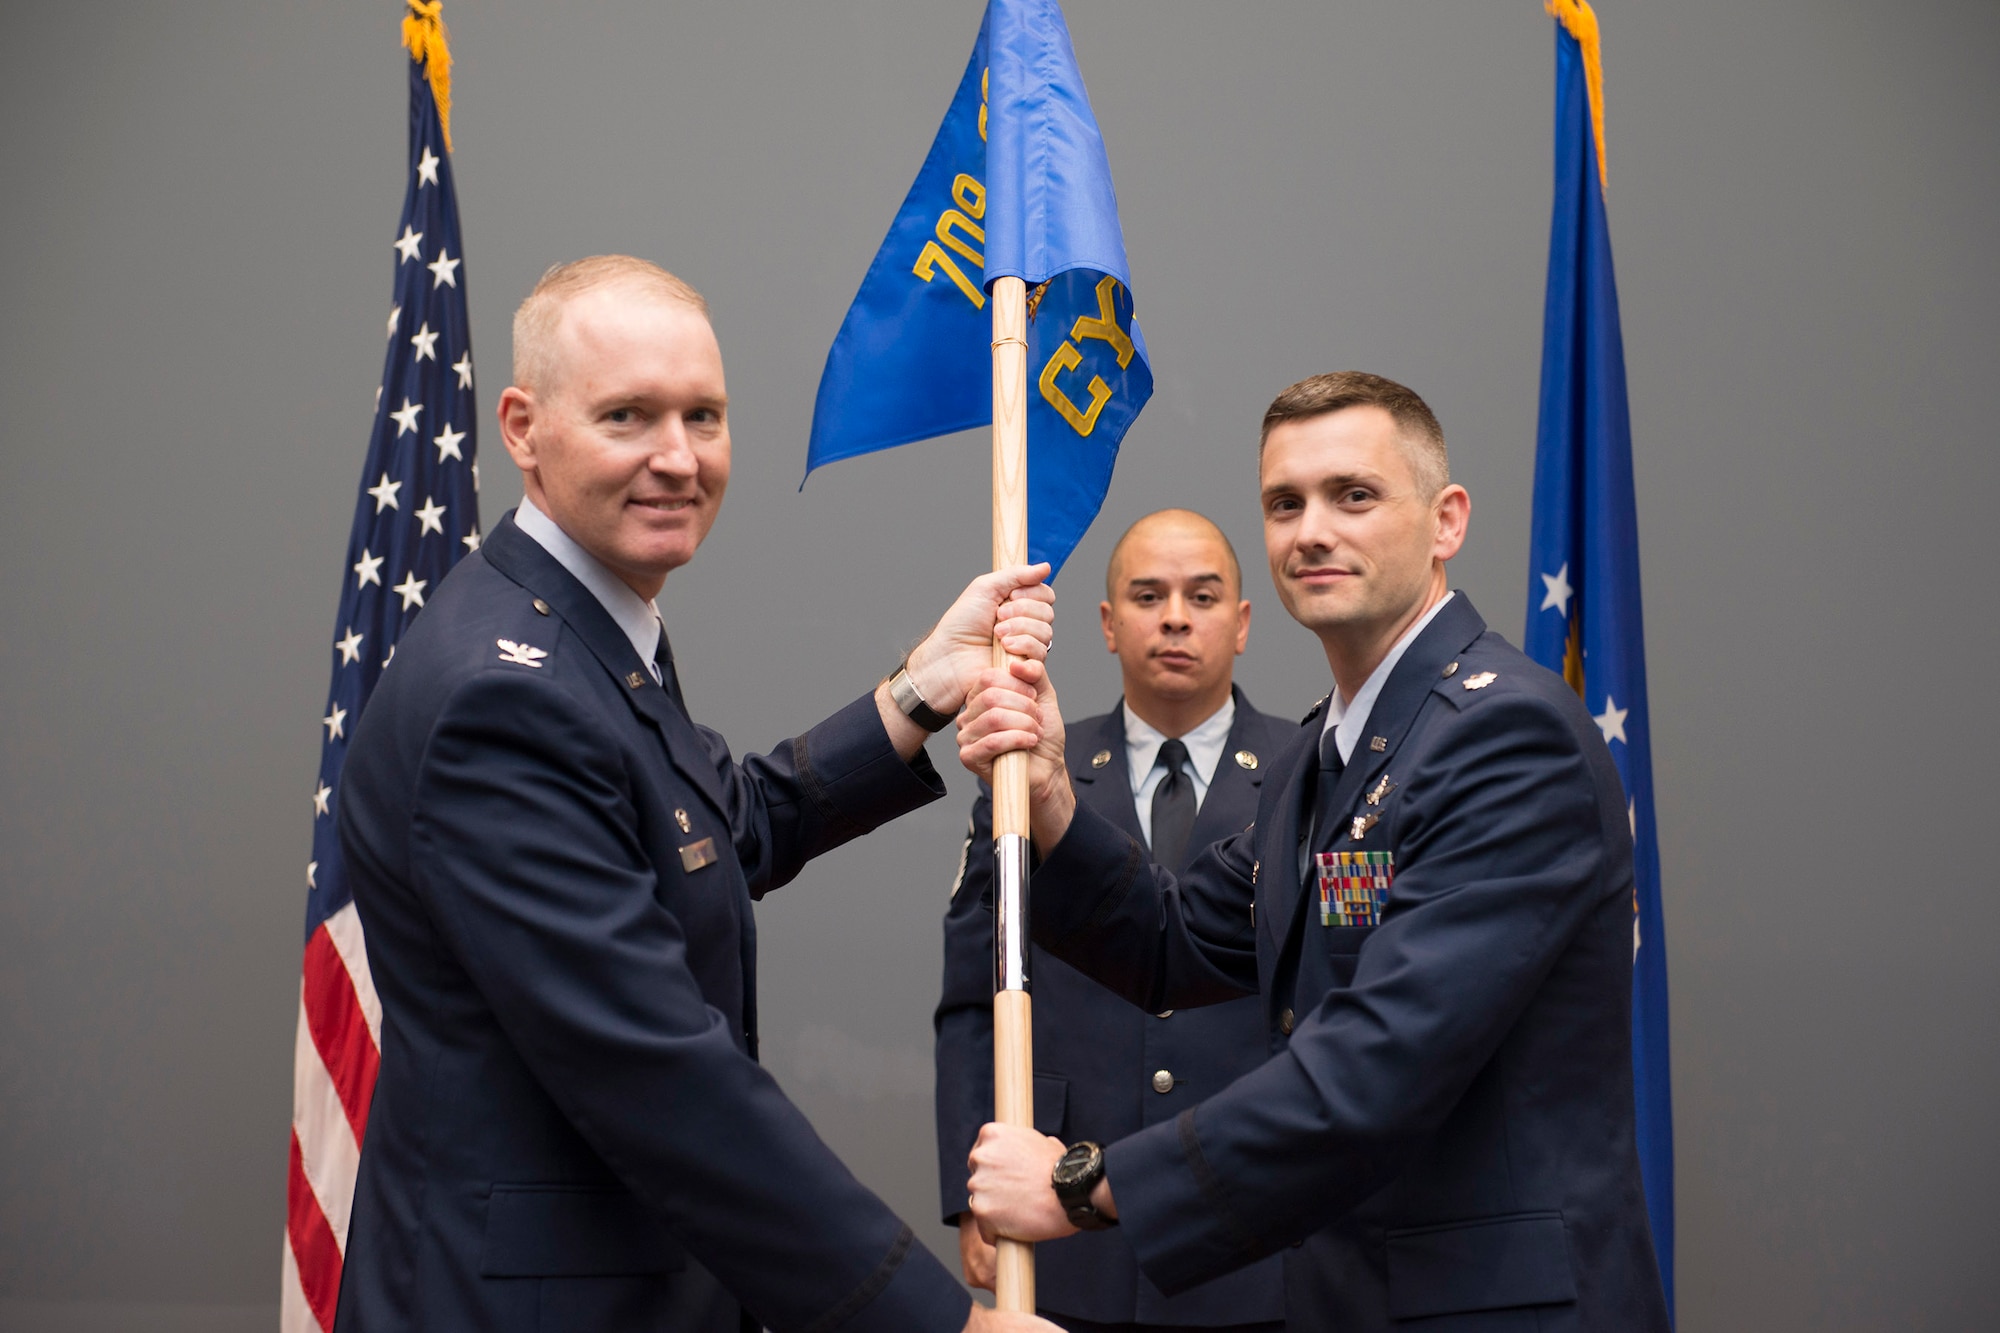 Lt. Col. Nathan Loyd (right), 709th Cyberspace Squadron commander, accepts his squadron’s guidon from Col. Richard Mendez, 709th Support Group commander, during a ceremony at the Air Force Technical Applications Center, Patrick AFB, Fla., April 11, 2018.  Loyd assumed command of the newly-formed squadron after the nuclear treaty monitoring center reorganized to improved mission effectiveness.  Pictured in background is Master Sgt. Brian Bowles, ceremonial guidon bearer.  (U.S. Air Force photo by Matthew S. Jurgens)